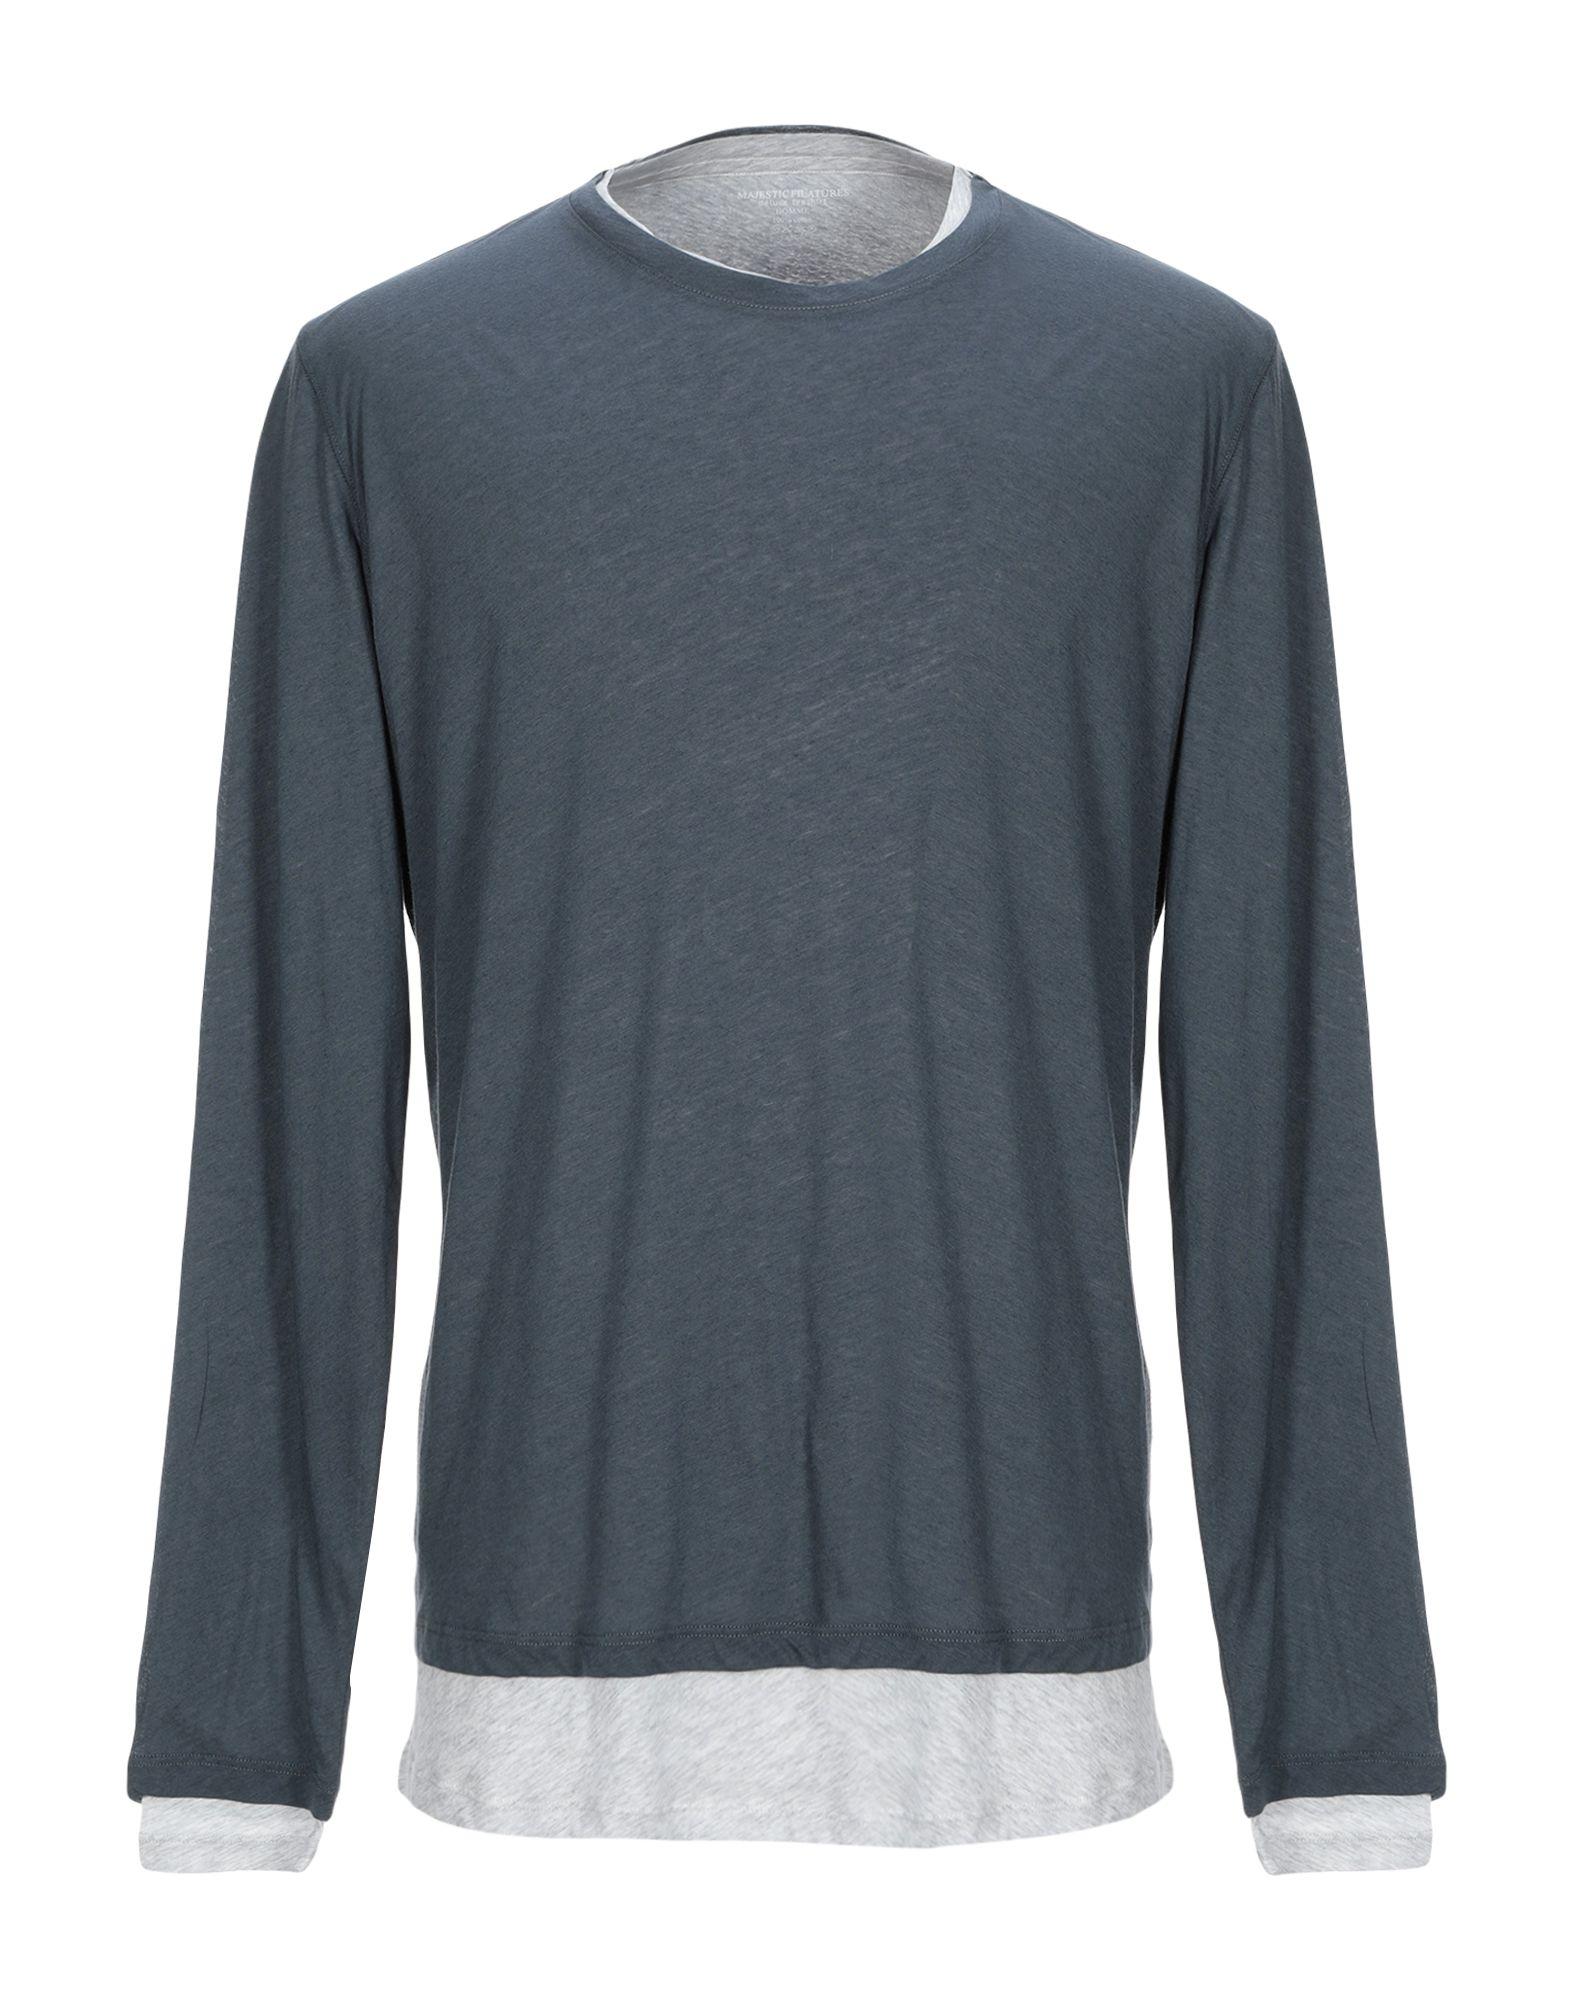 Majestic Filatures Cotton T-shirt in Steel Grey (Gray) for Men - Lyst